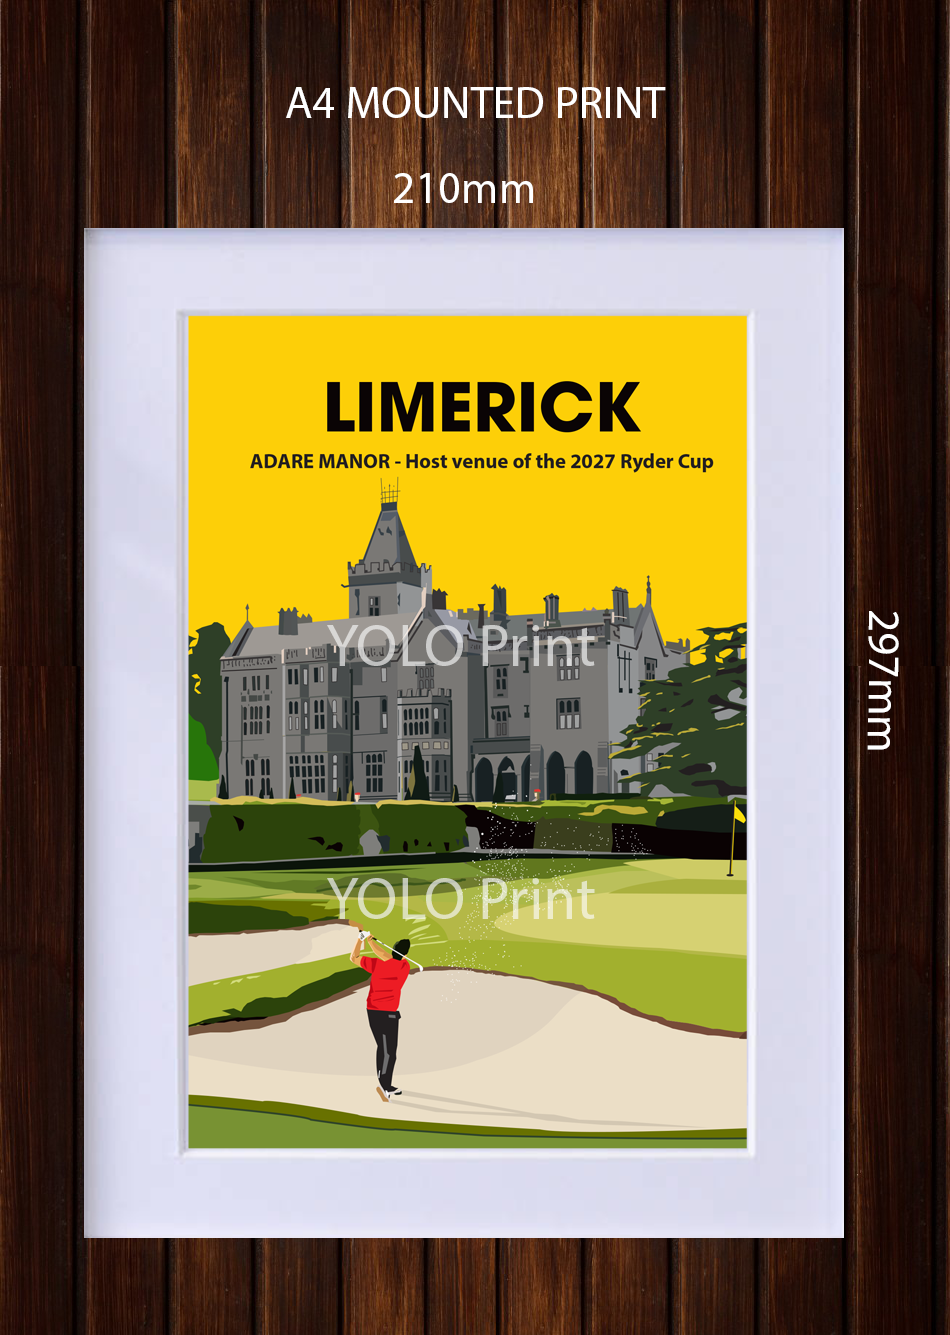 Limerick Postcard or A4 Mounted Print  - Adare Manor